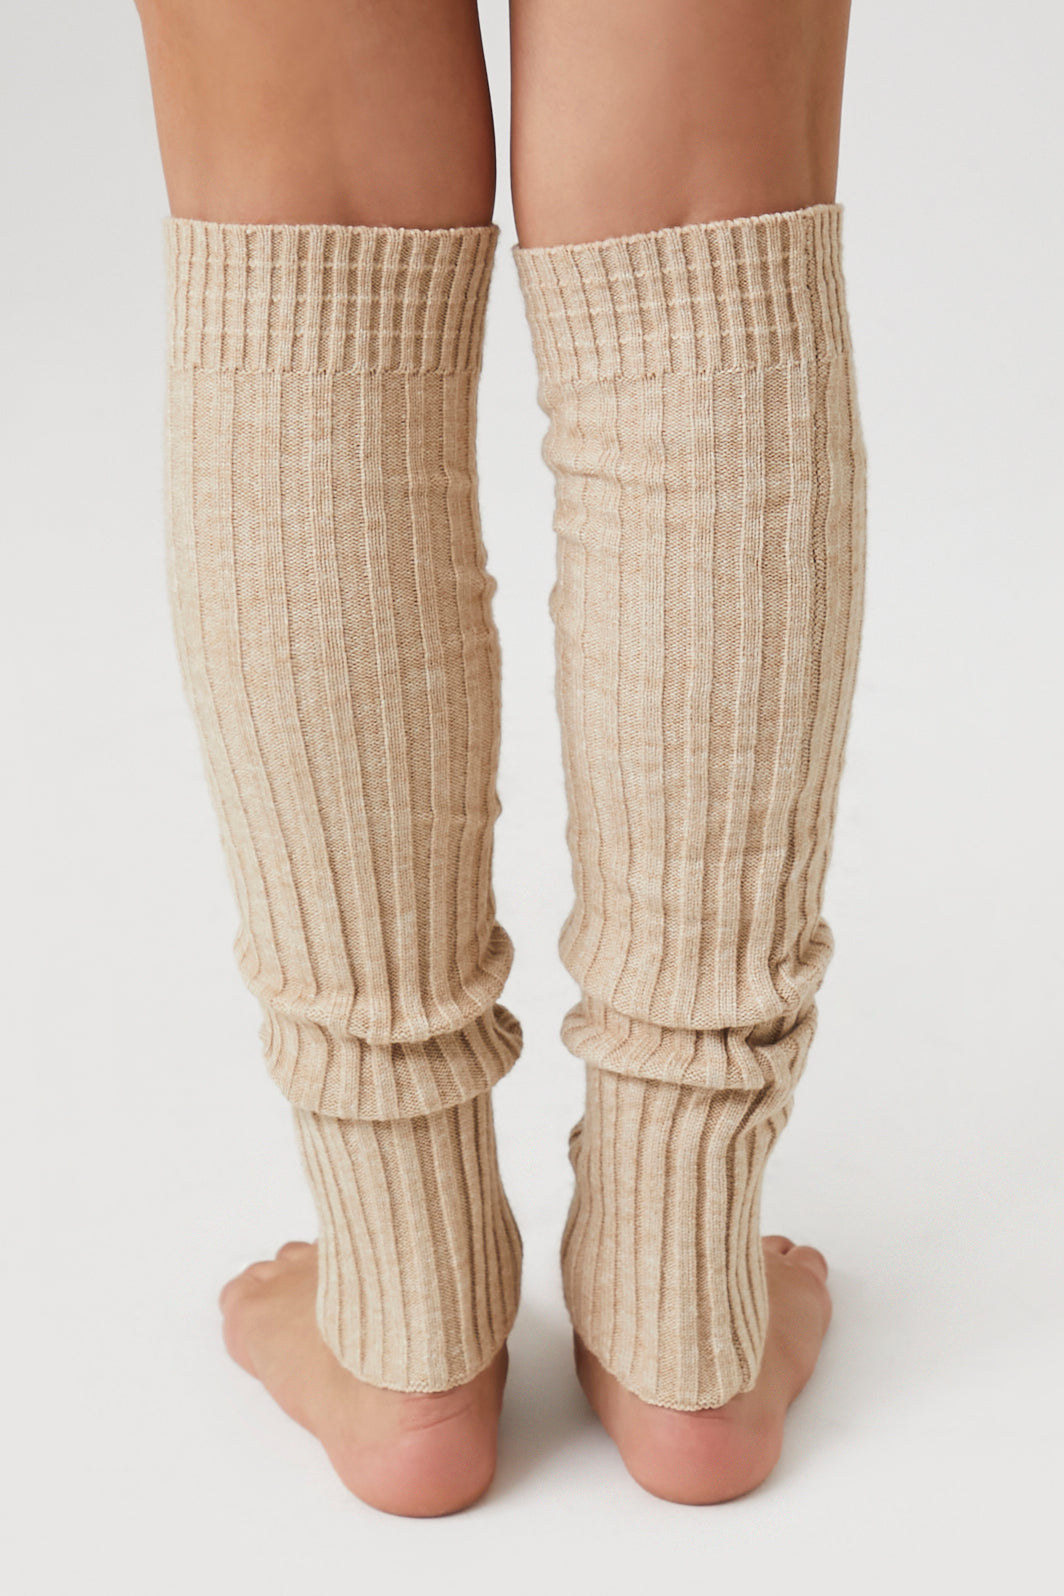 Shop For Ribbed Knit Leg Warmers